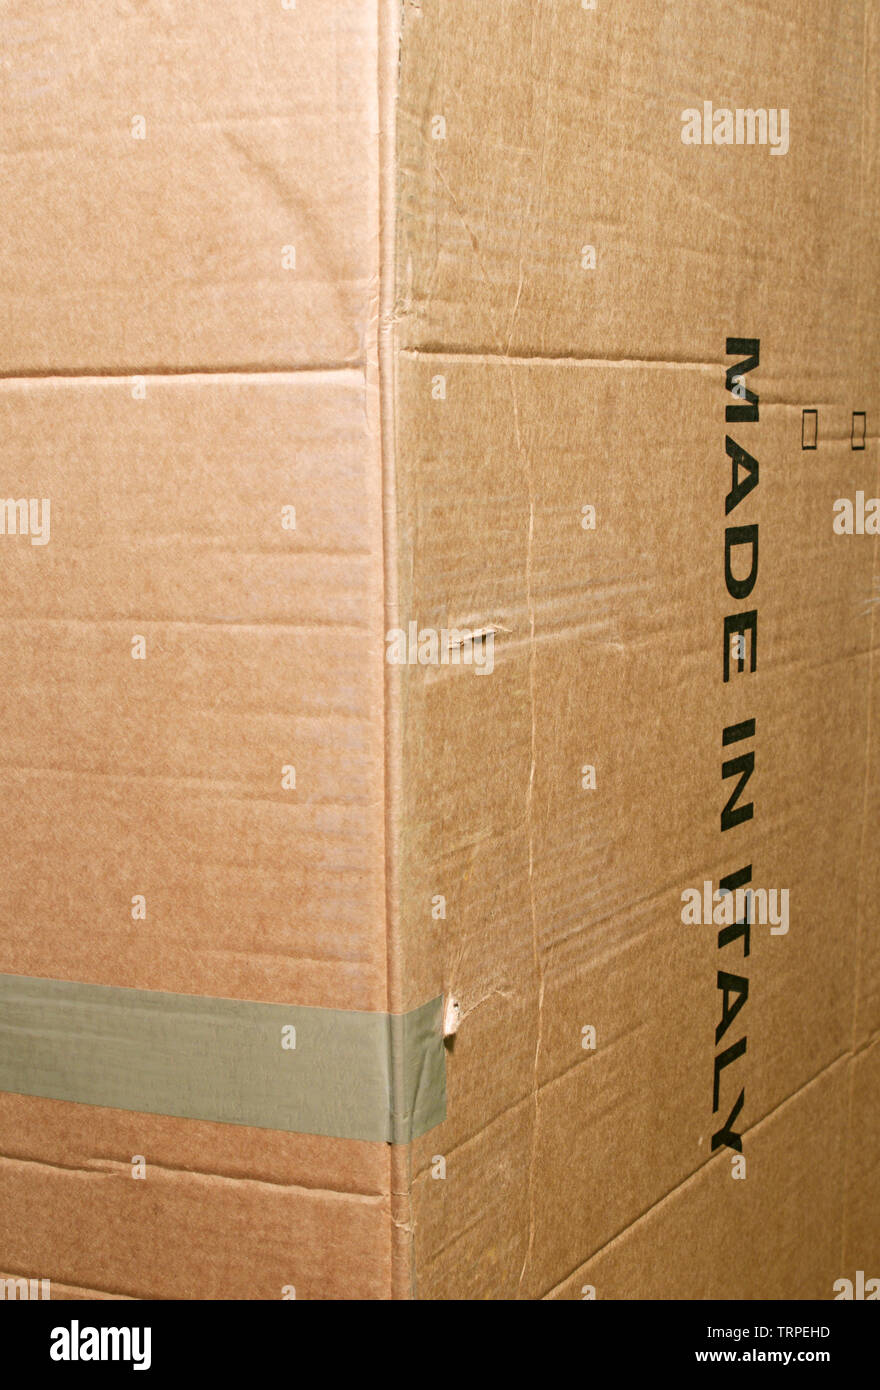 made in italy printed on cardboard box Stock Photo